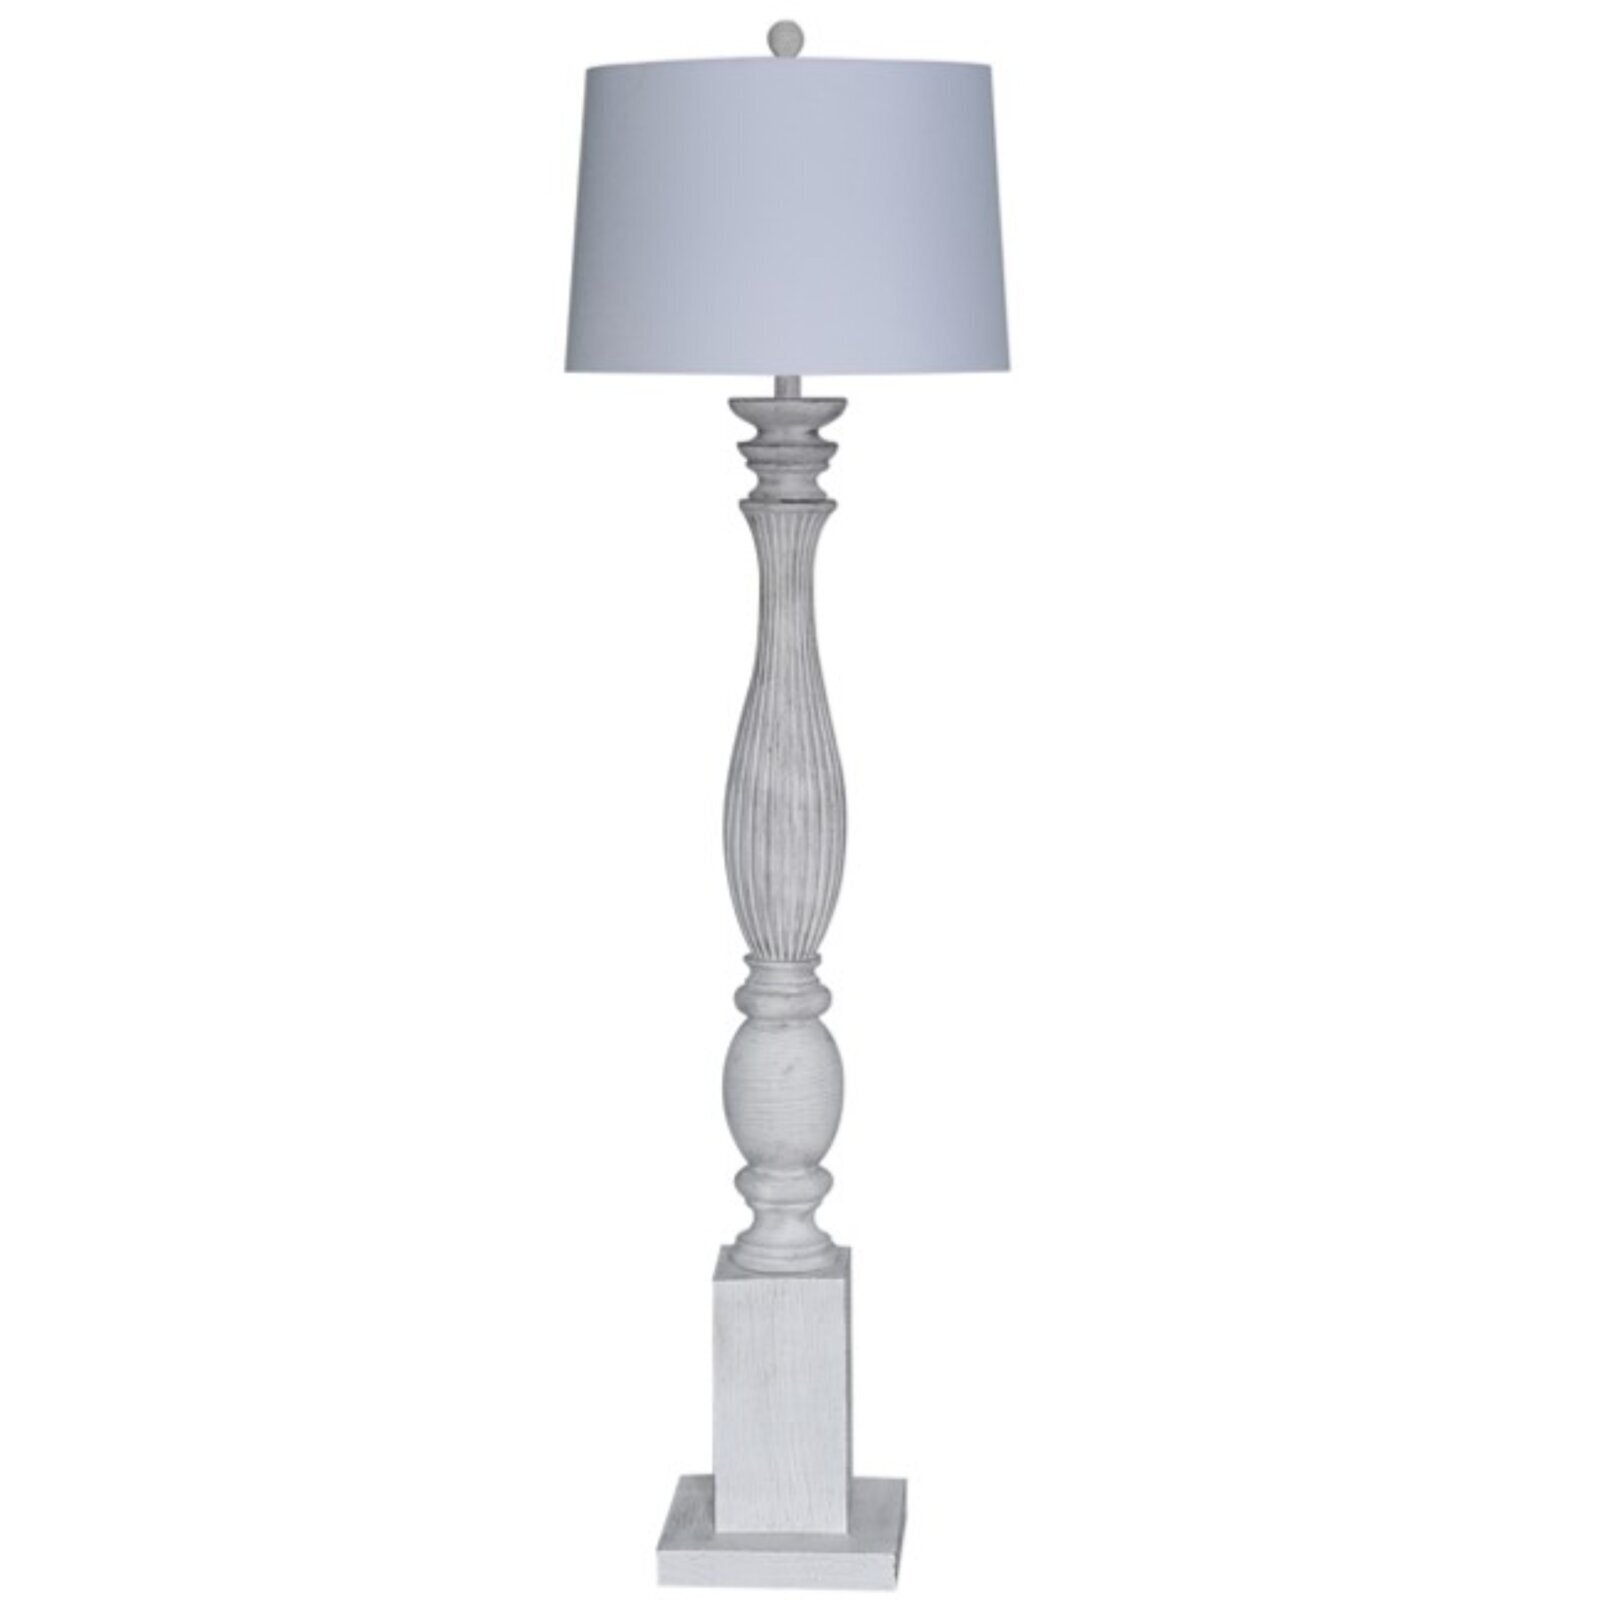 French Provincial Floor Lamp